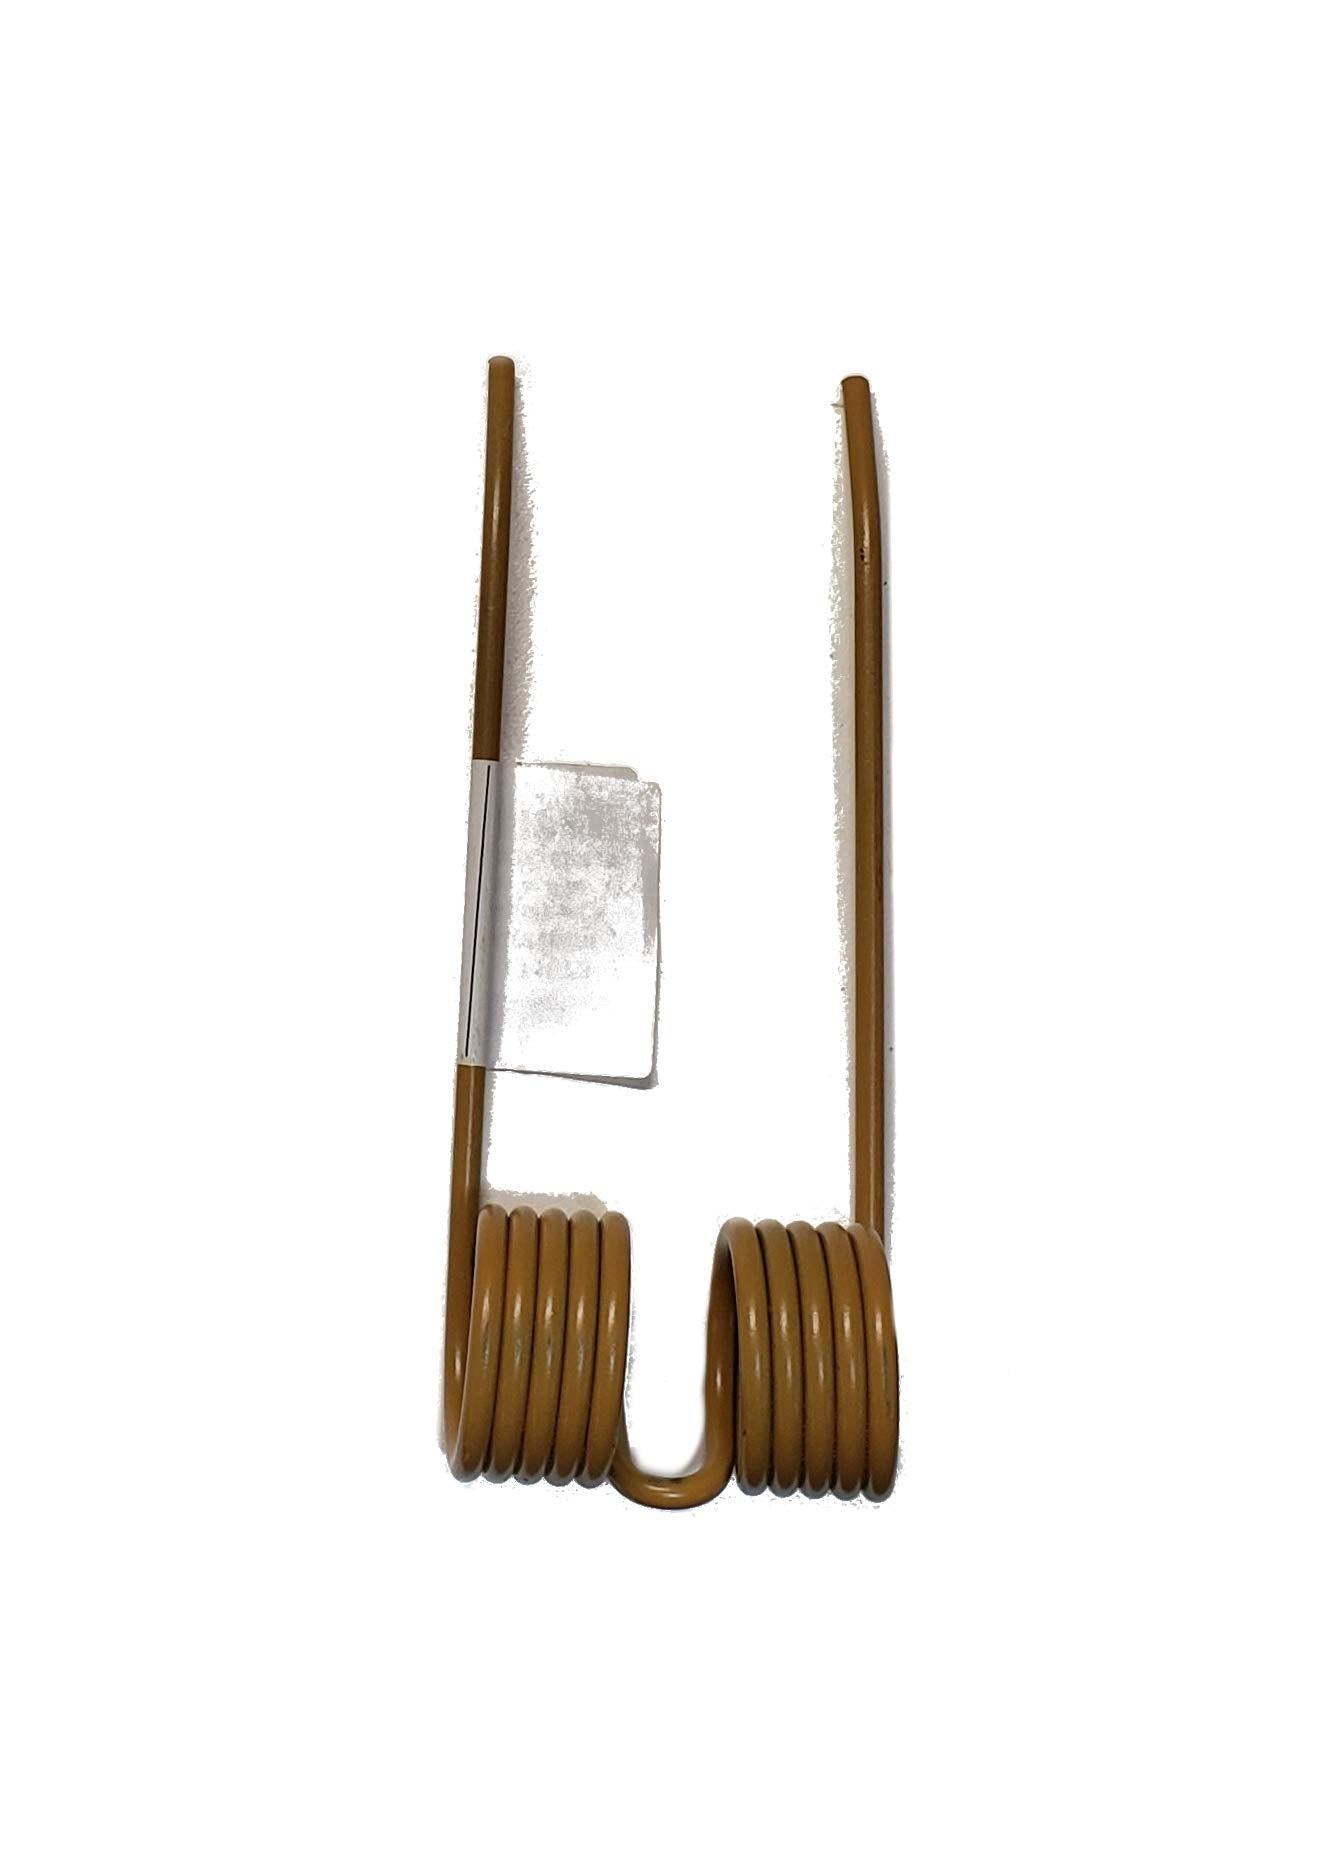 A&I Products Baler Tooth Replacement - A-131673